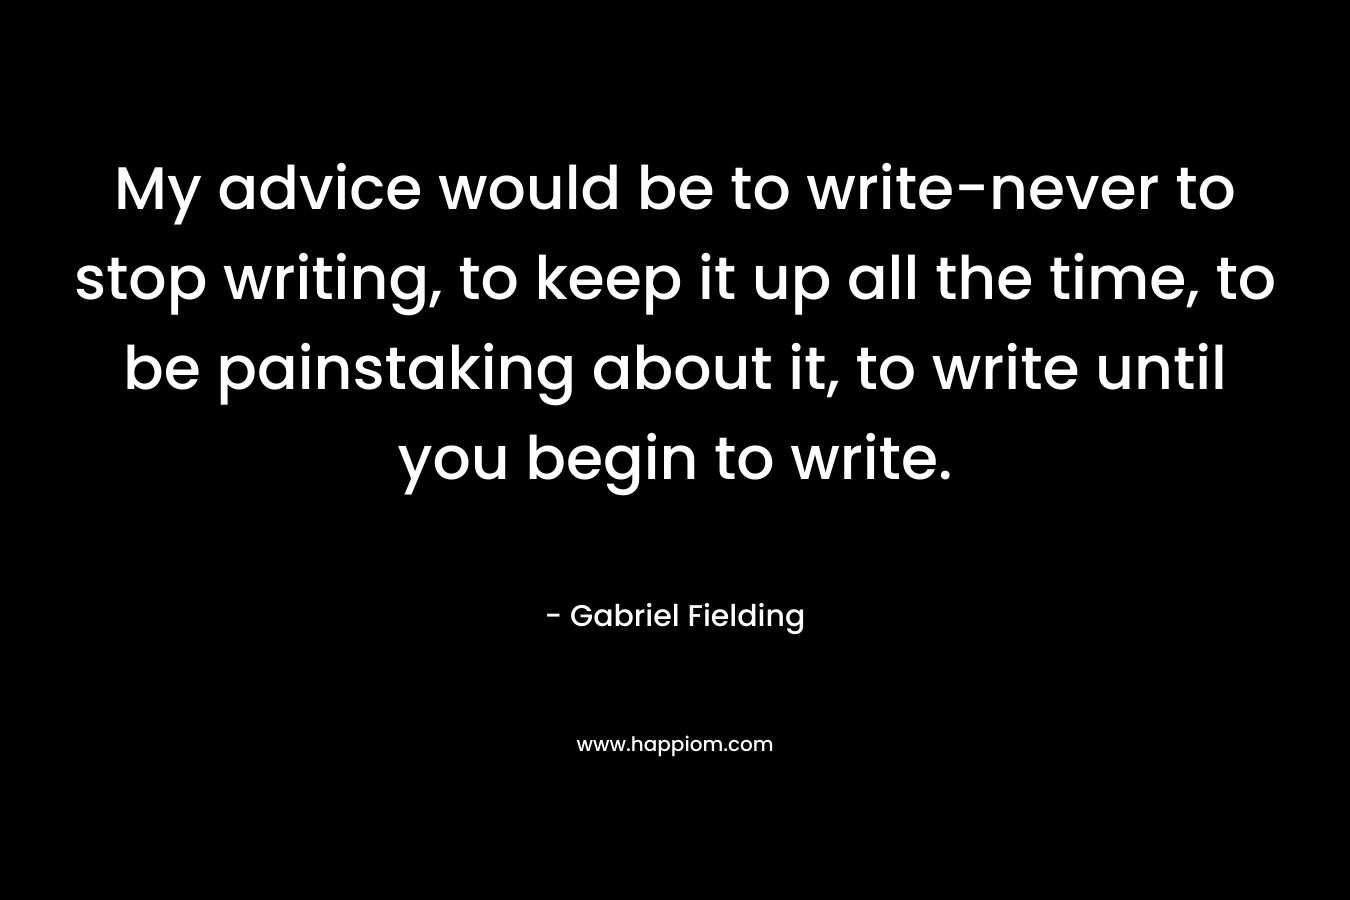 My advice would be to write-never to stop writing, to keep it up all the time, to be painstaking about it, to write until you begin to write. – Gabriel Fielding